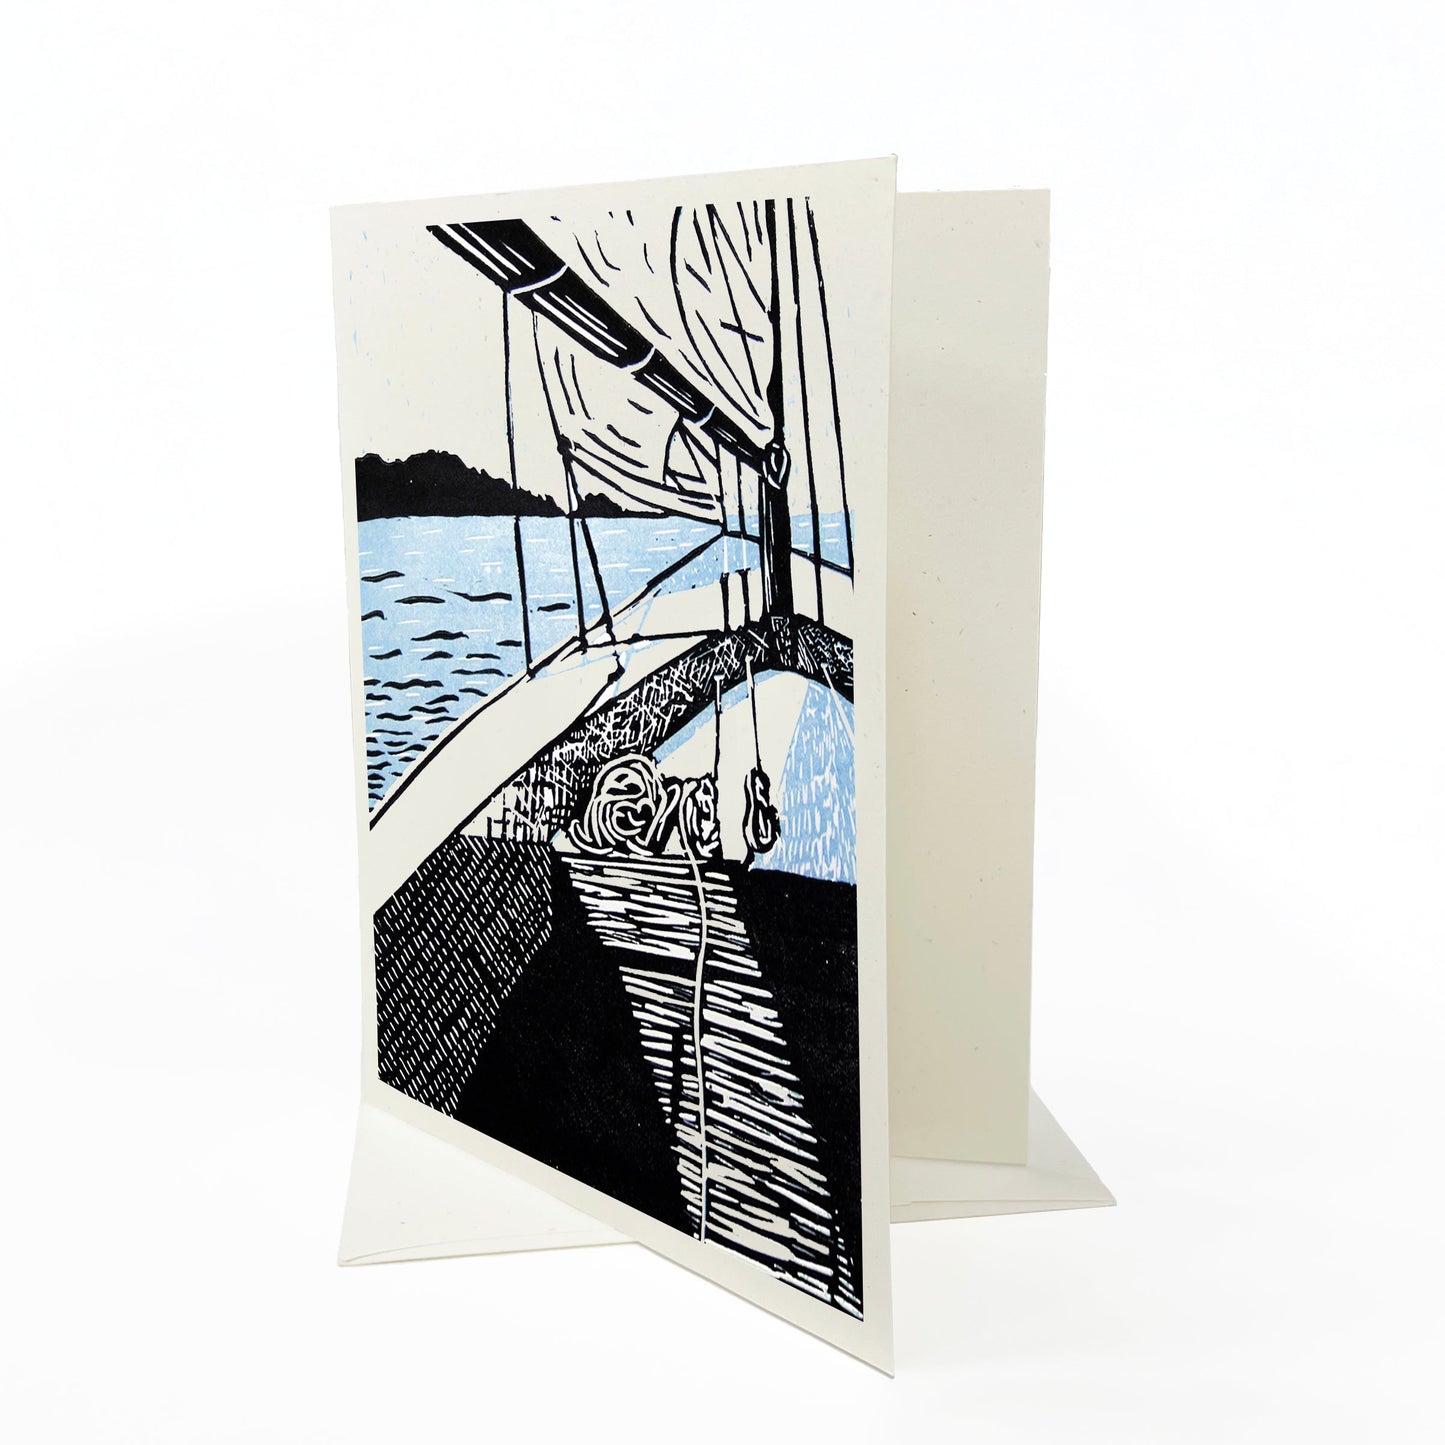 A casually elegant card featuring sailing art by Natalia Wohletz of Peninsula Prints titled To My Estella.